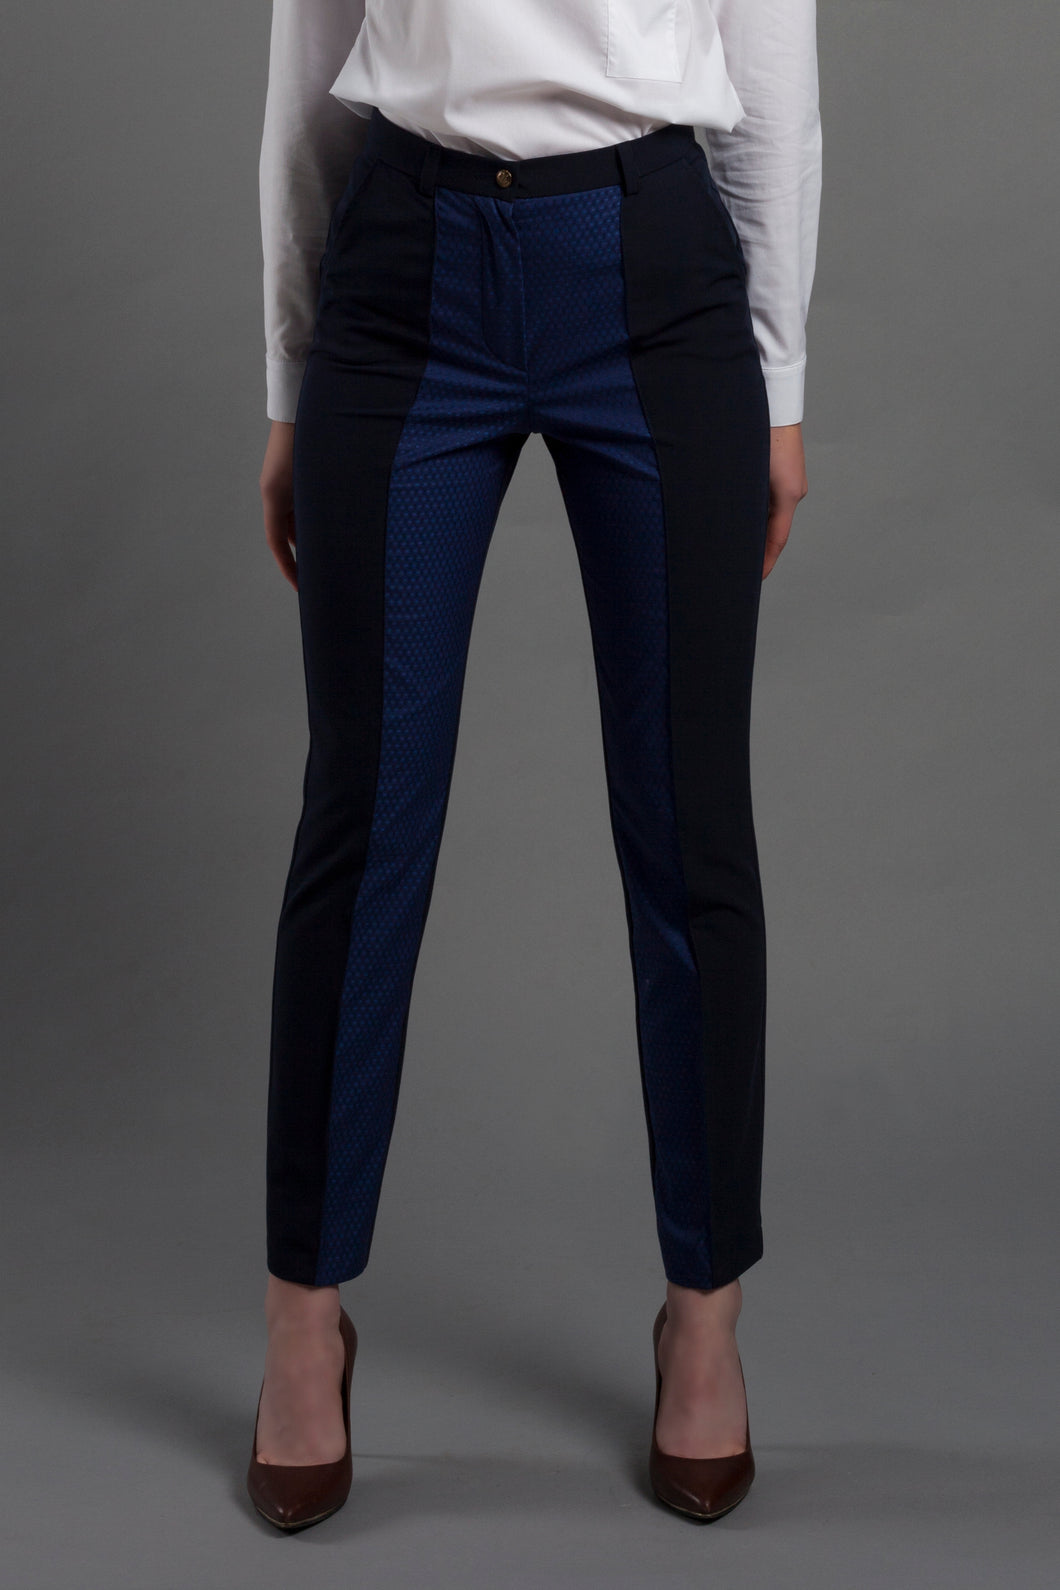 Navy blue pencil pants with jacquard insert